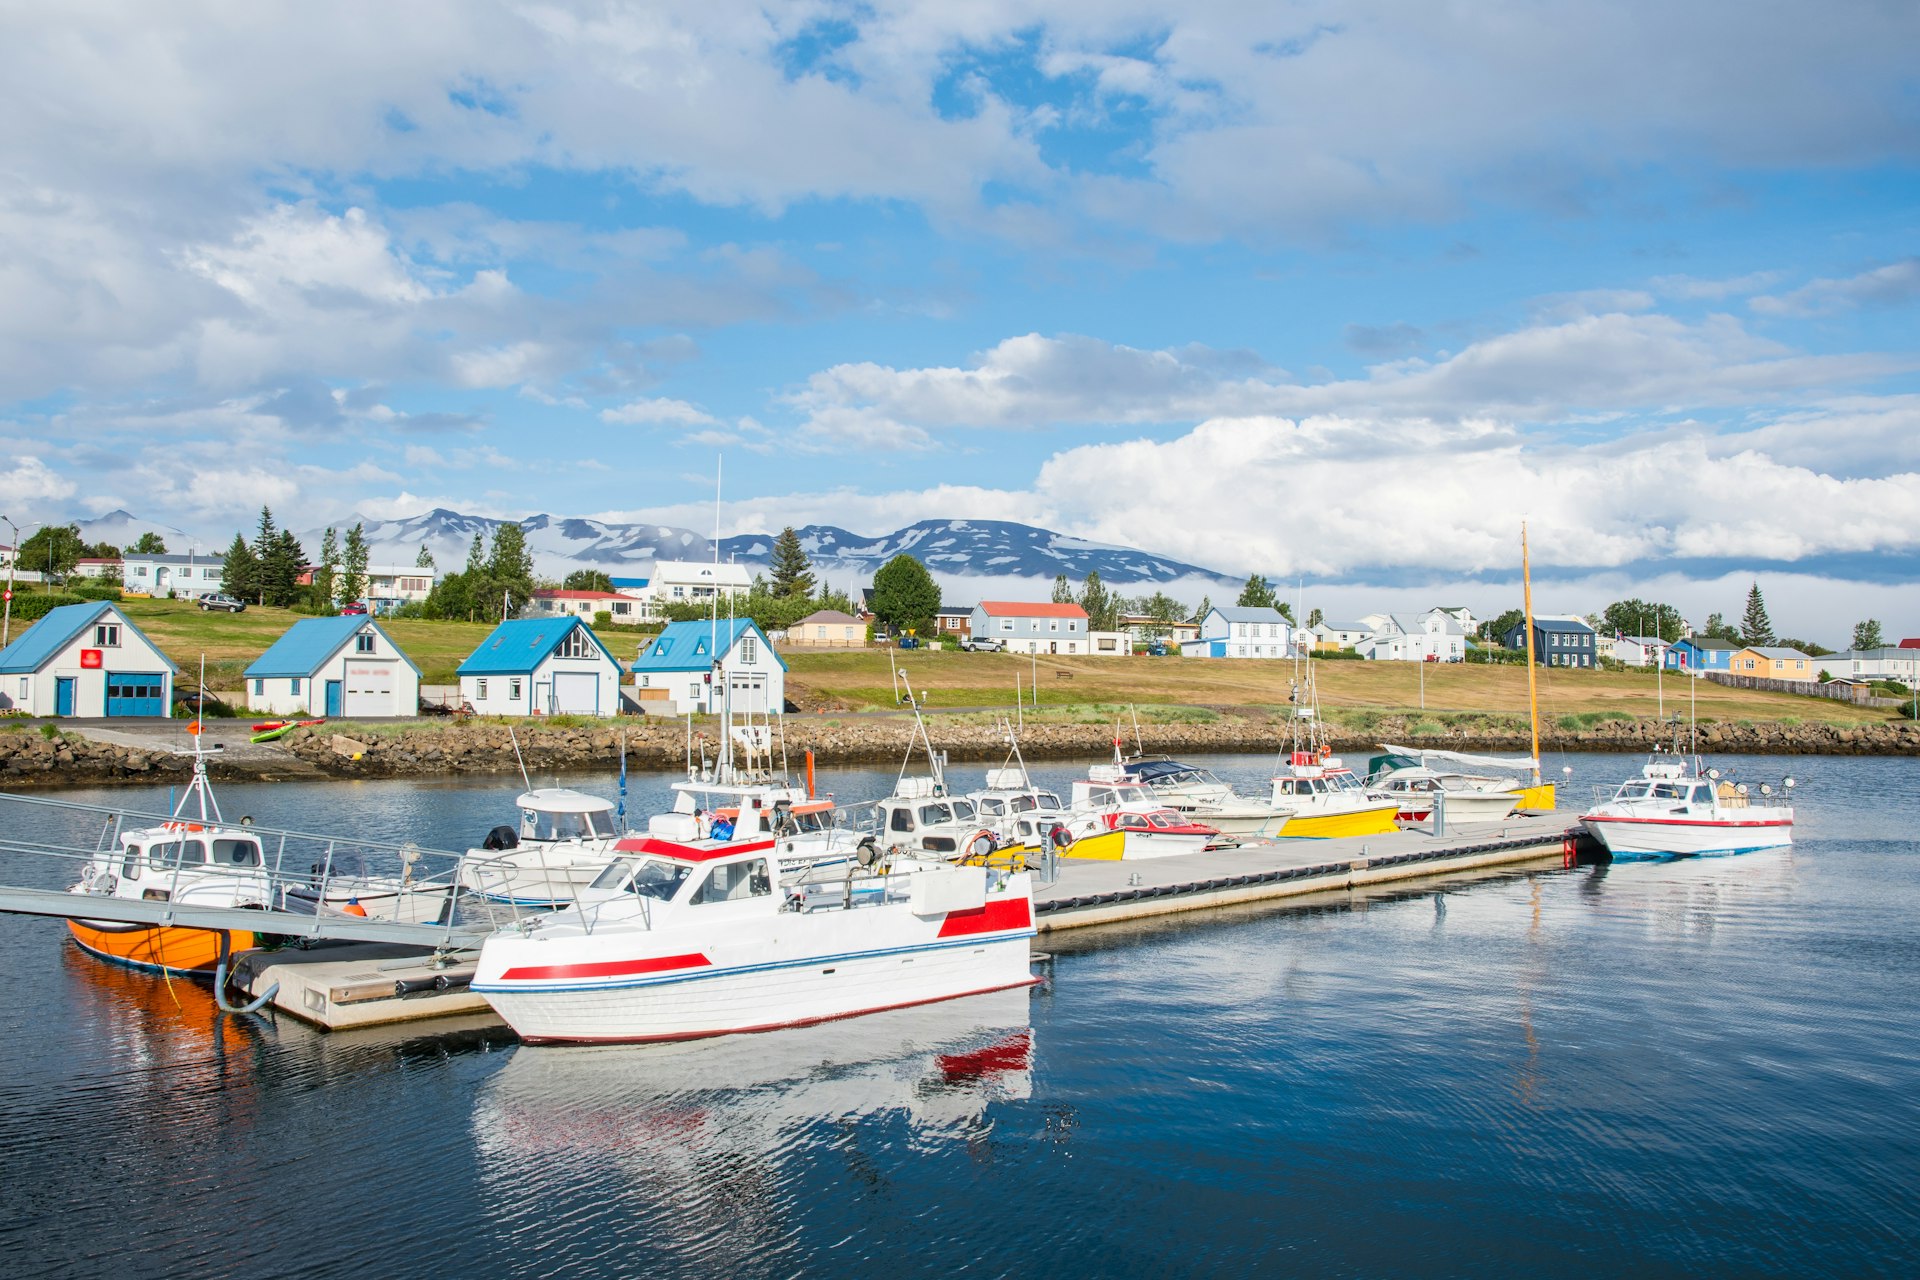 Summer day in village of Hrisey in North Iceland with boats on the water and brightly-colored homes in the background